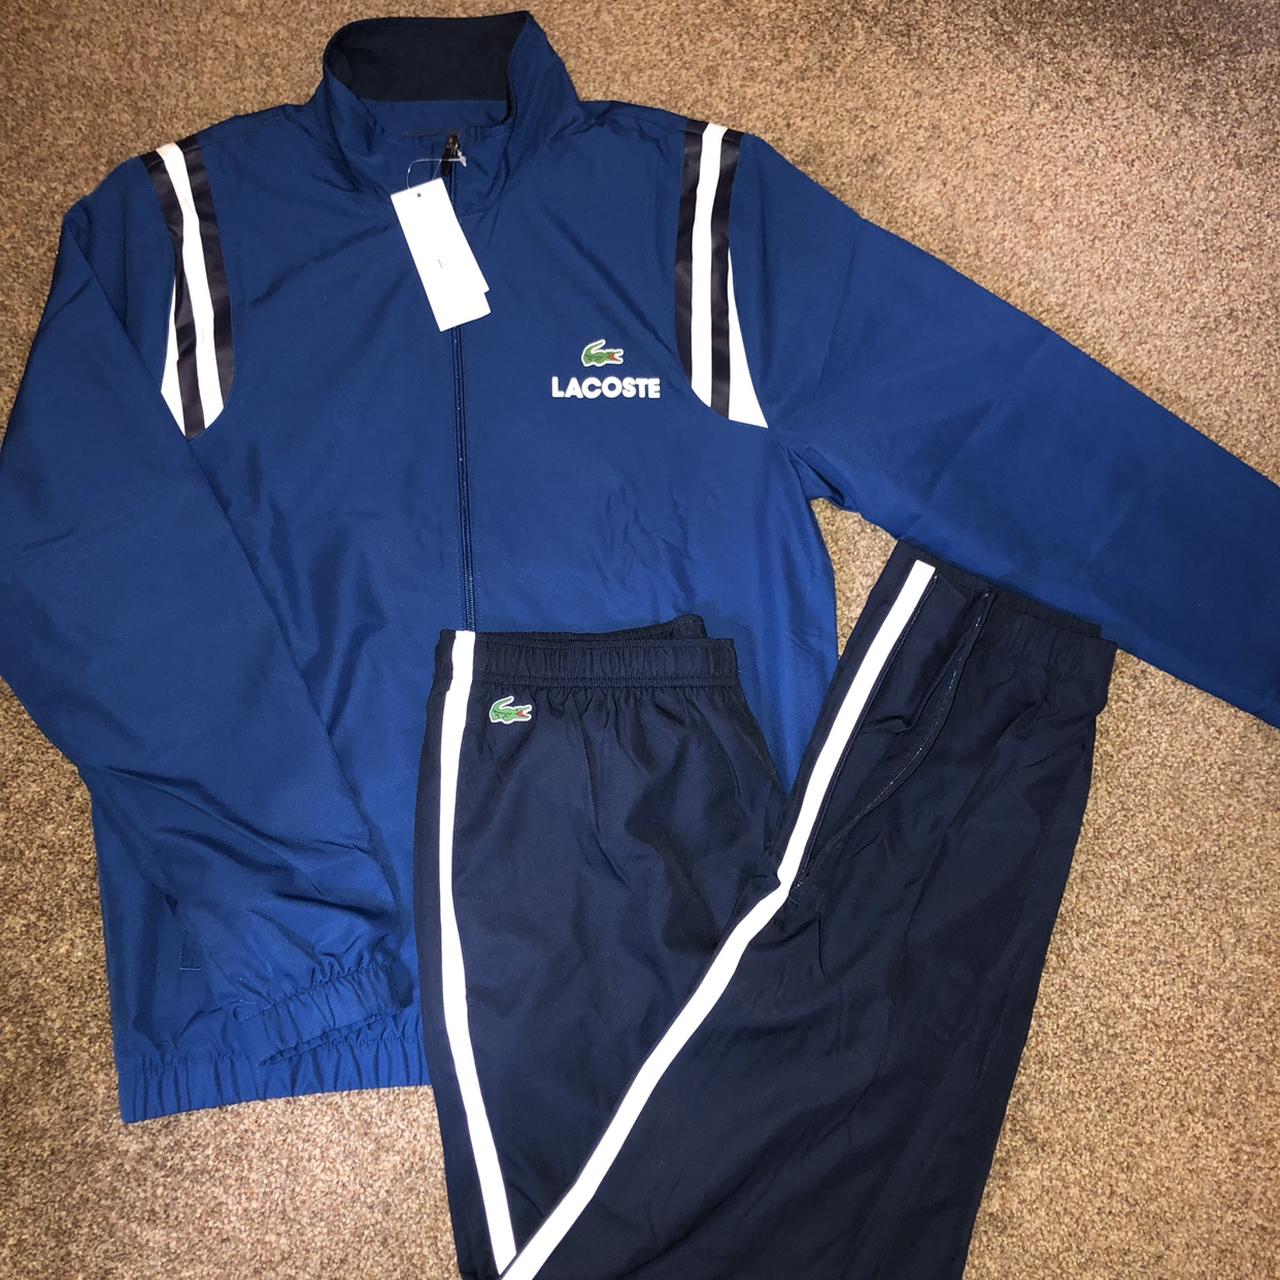 Lacoste full men's tracksuit brand new with tags on 